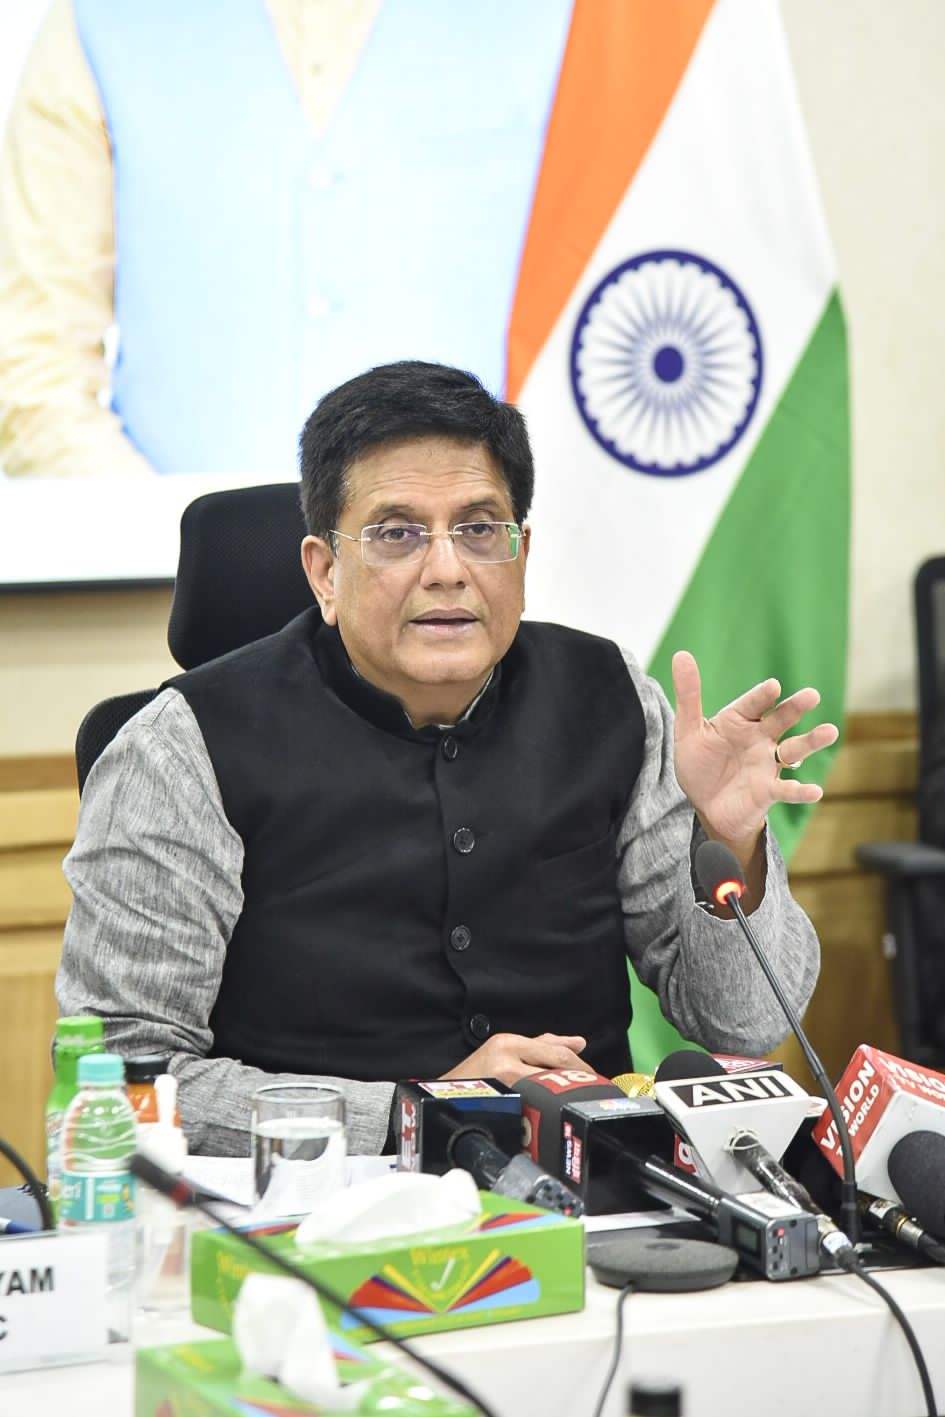 You are currently viewing Piyush Goyal calls upon Startups to help micro-entrepreneurs in rural areas, leverage technology to grow their businesses and encourage farmers, weavers & artisans etc. to use digital platforms to sell their products